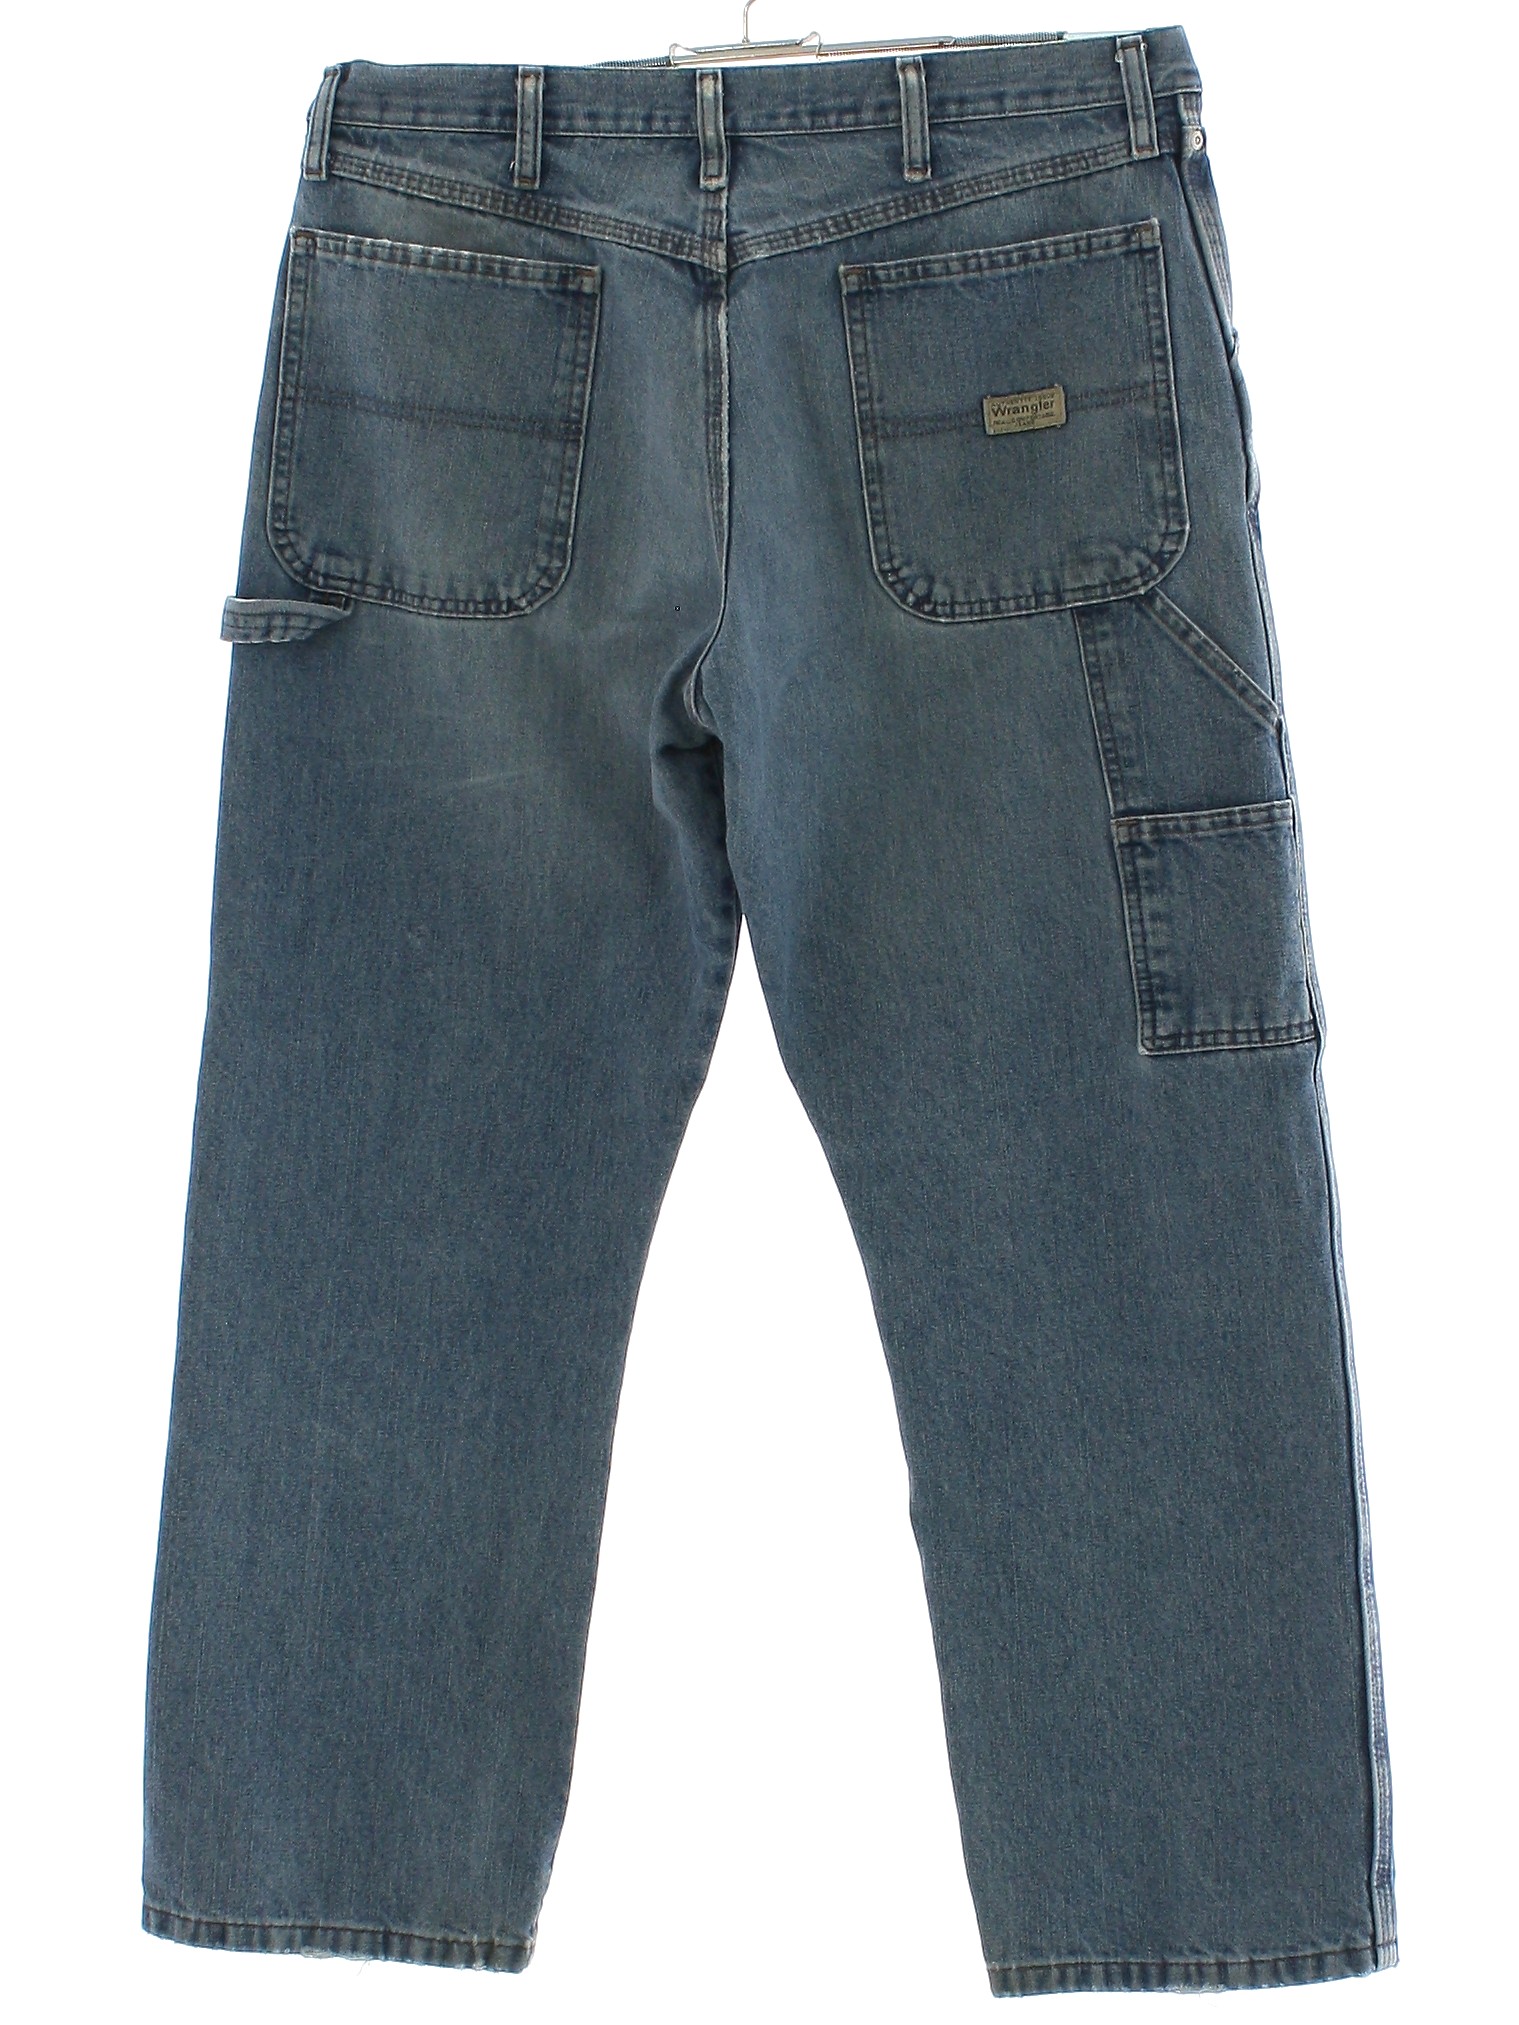 1990s Vintage Pants: 90s or newer -Wrangler- Mens faded and worn blue ...